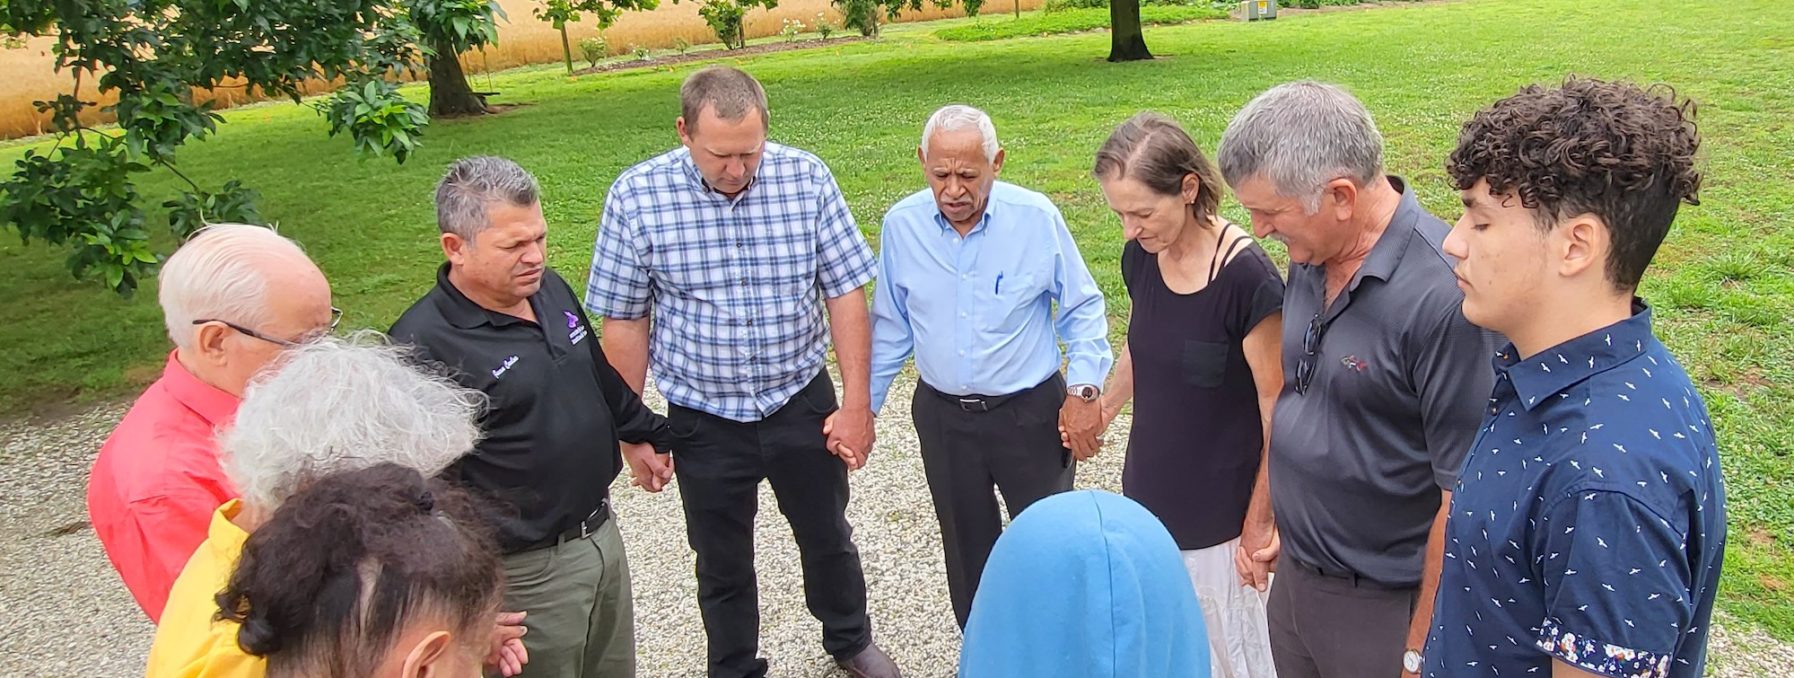 Group standing together in prayer